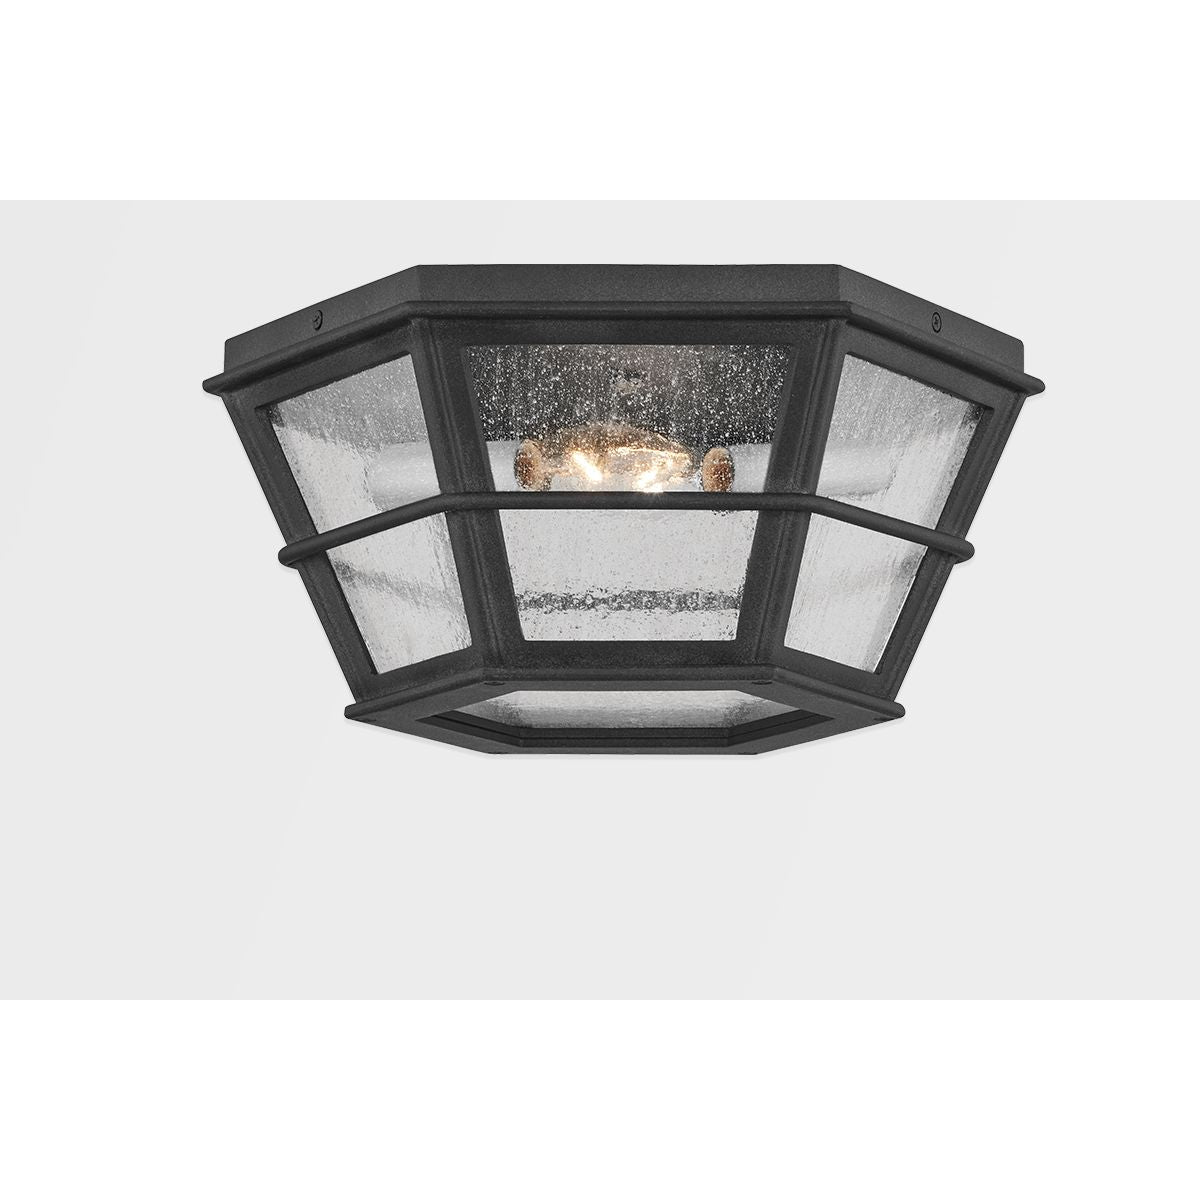 LAKE COUNTY 14 in. 2 lights Outdoor Flush Mount iron finish